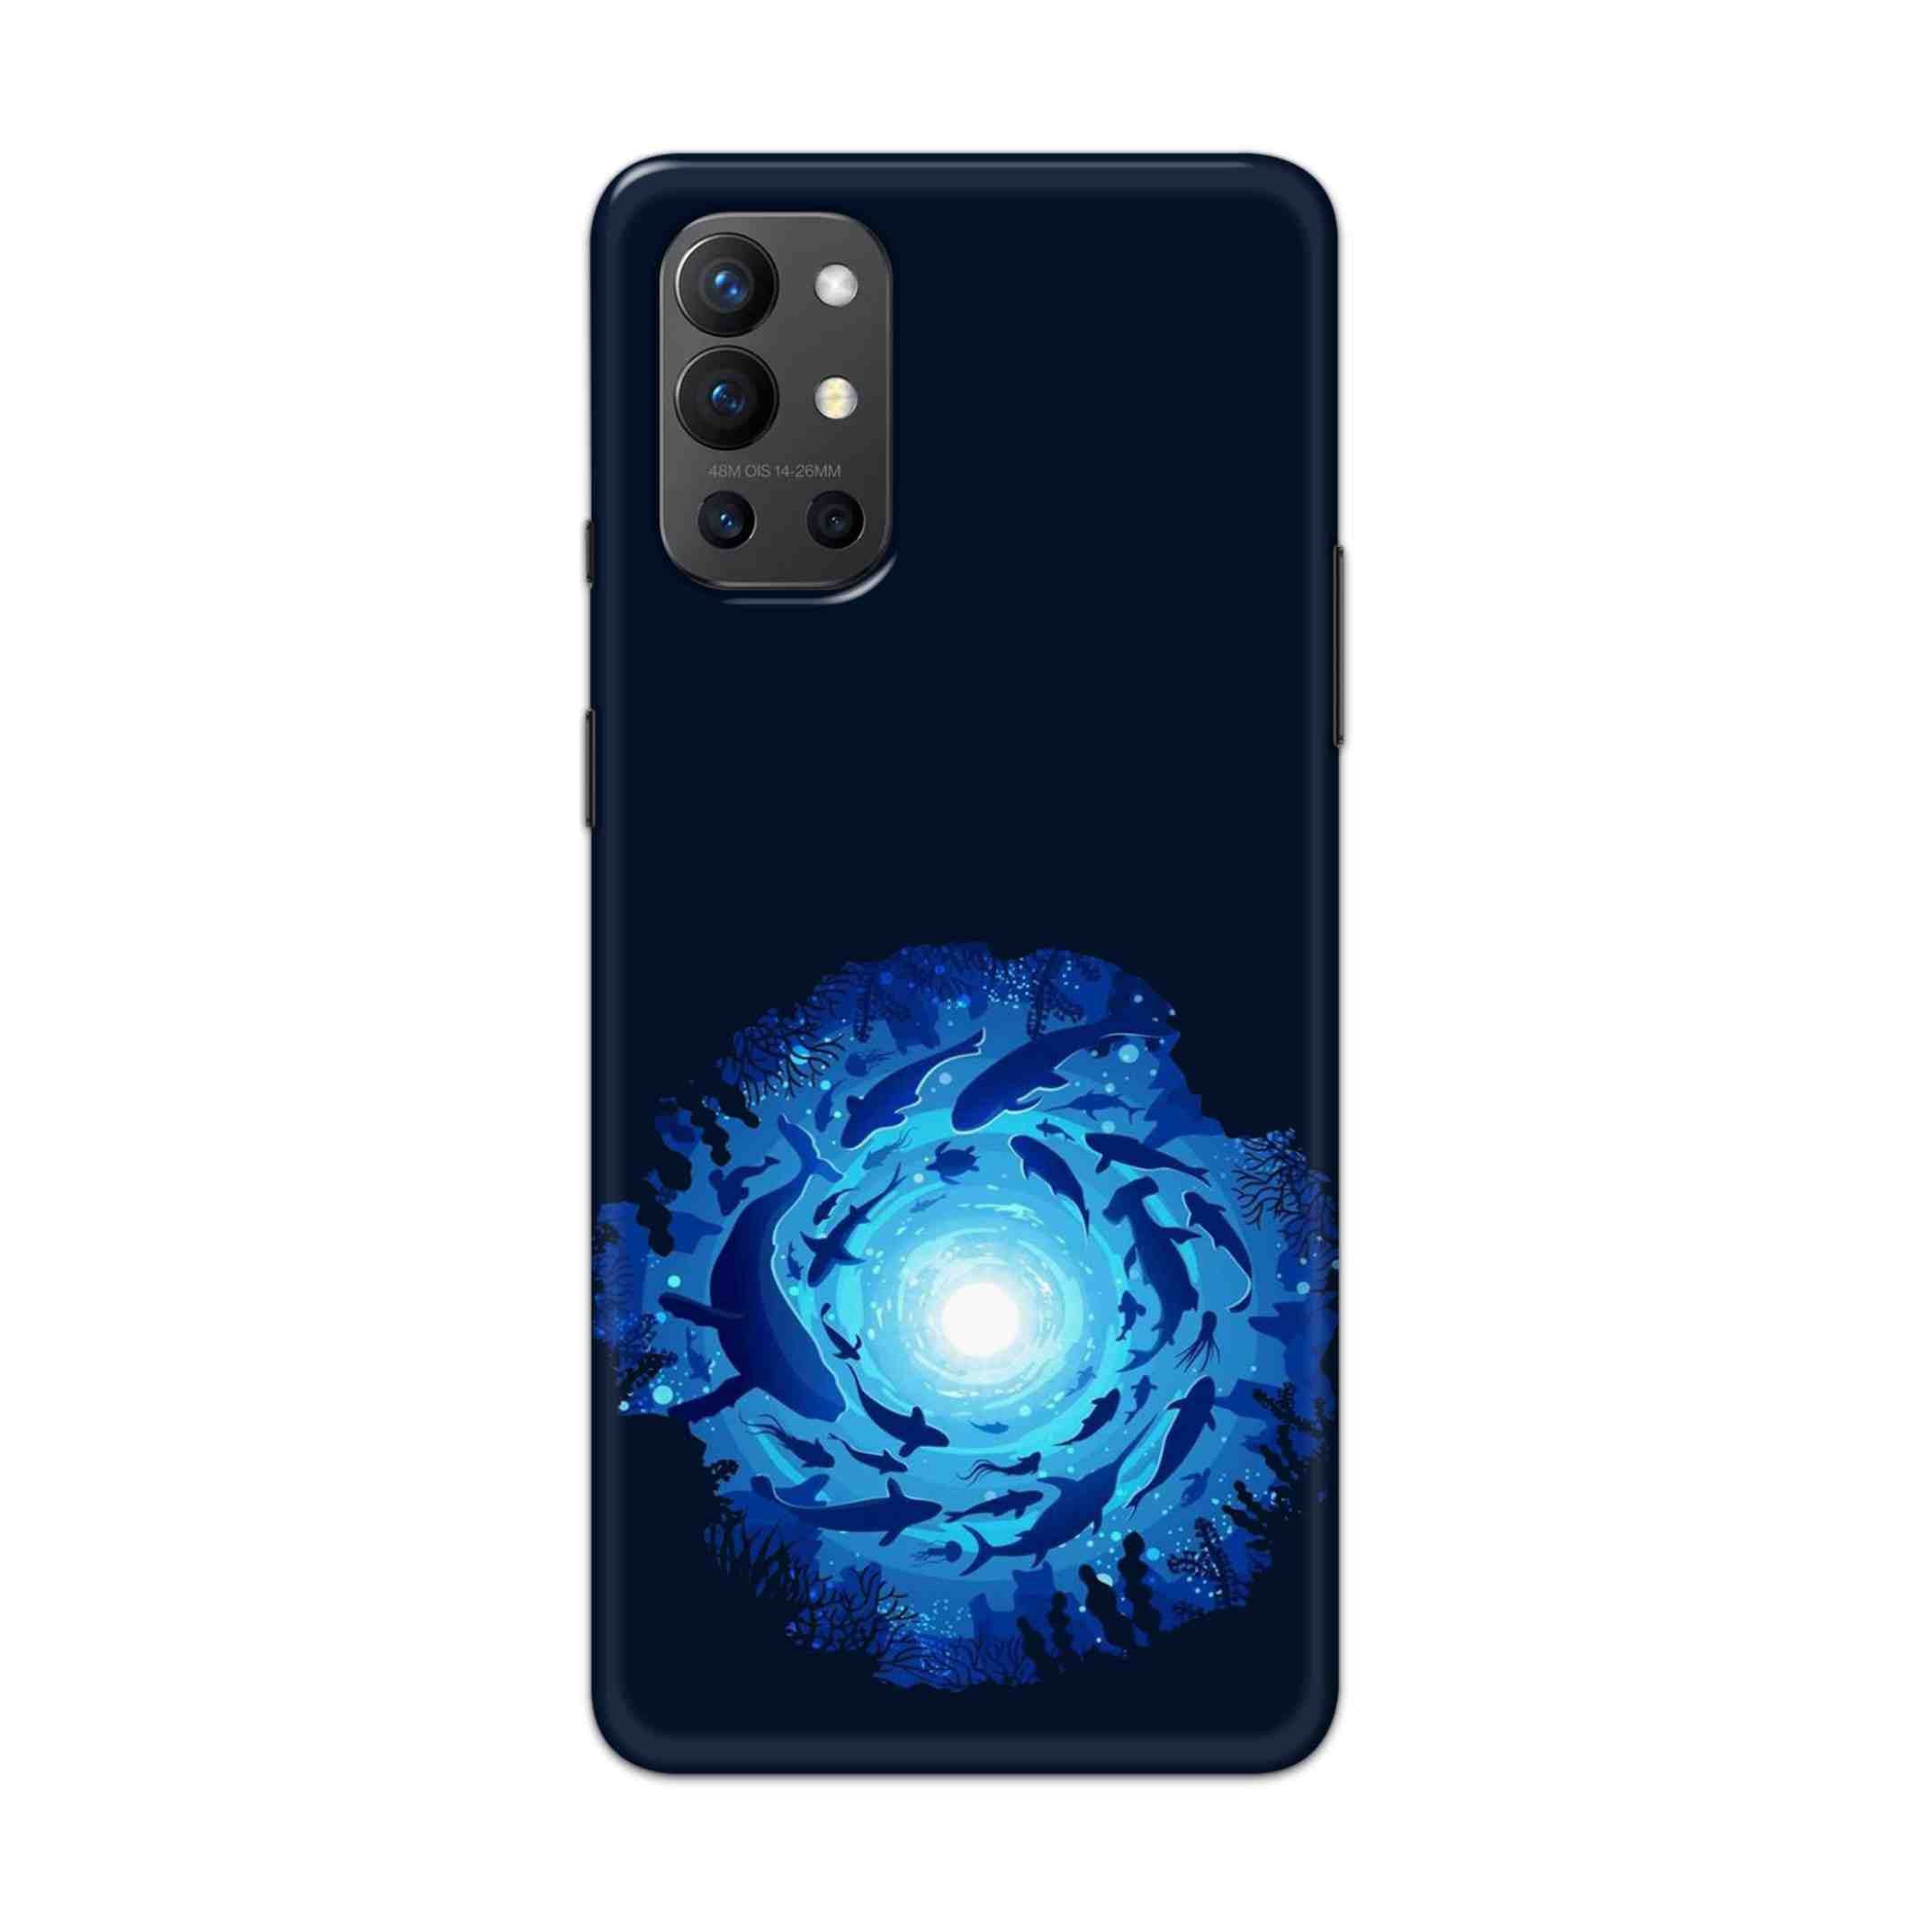 Buy Blue Whale Hard Back Mobile Phone Case Cover For OnePlus 9R / 8T Online